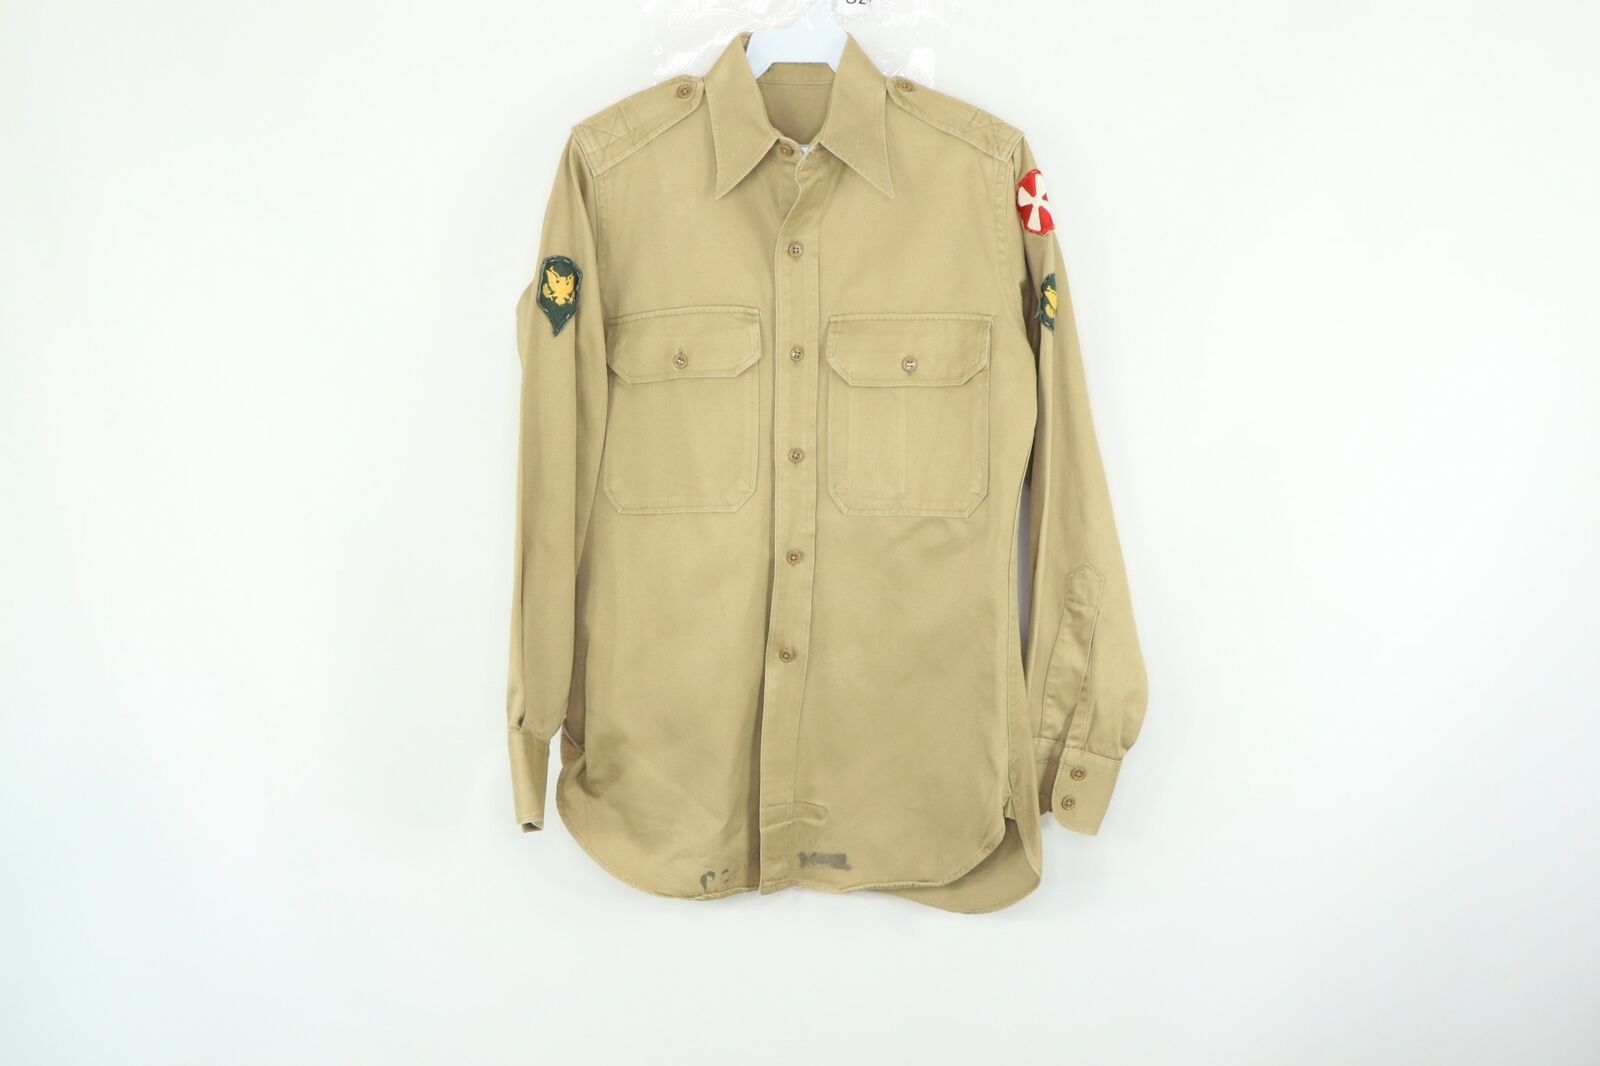 Other 50s Mens US Army Korean 8th Army Task Force Military Shirt Size US M / EU 48-50 / 2 - 1 Preview